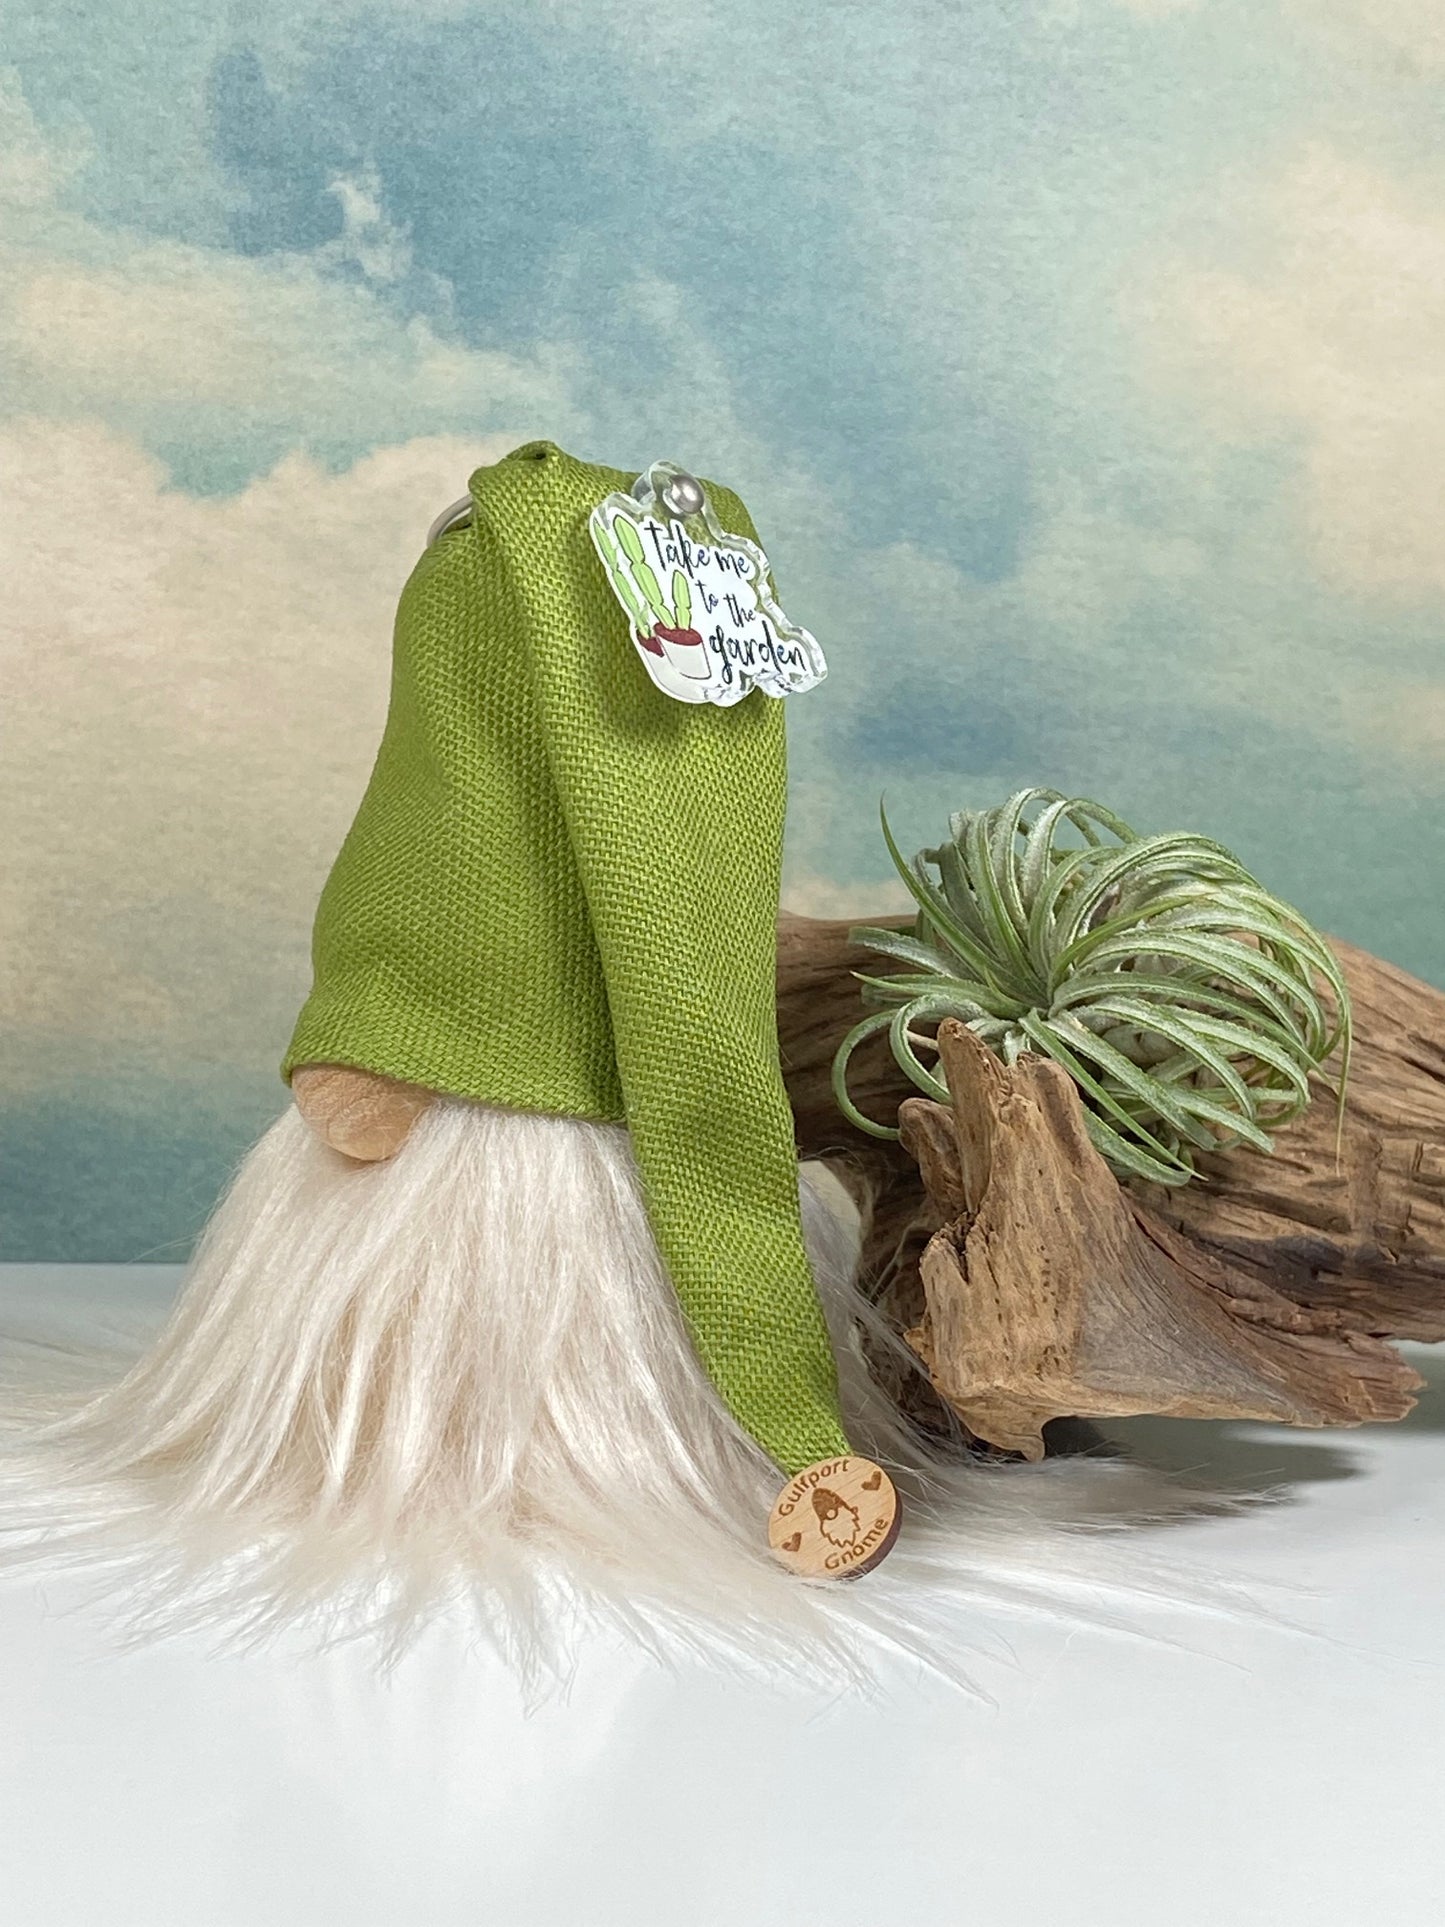 Gulfport Gnome™-Indoor Garden Decor- Plush Take me to the Garden Gnome for Plant Lovers